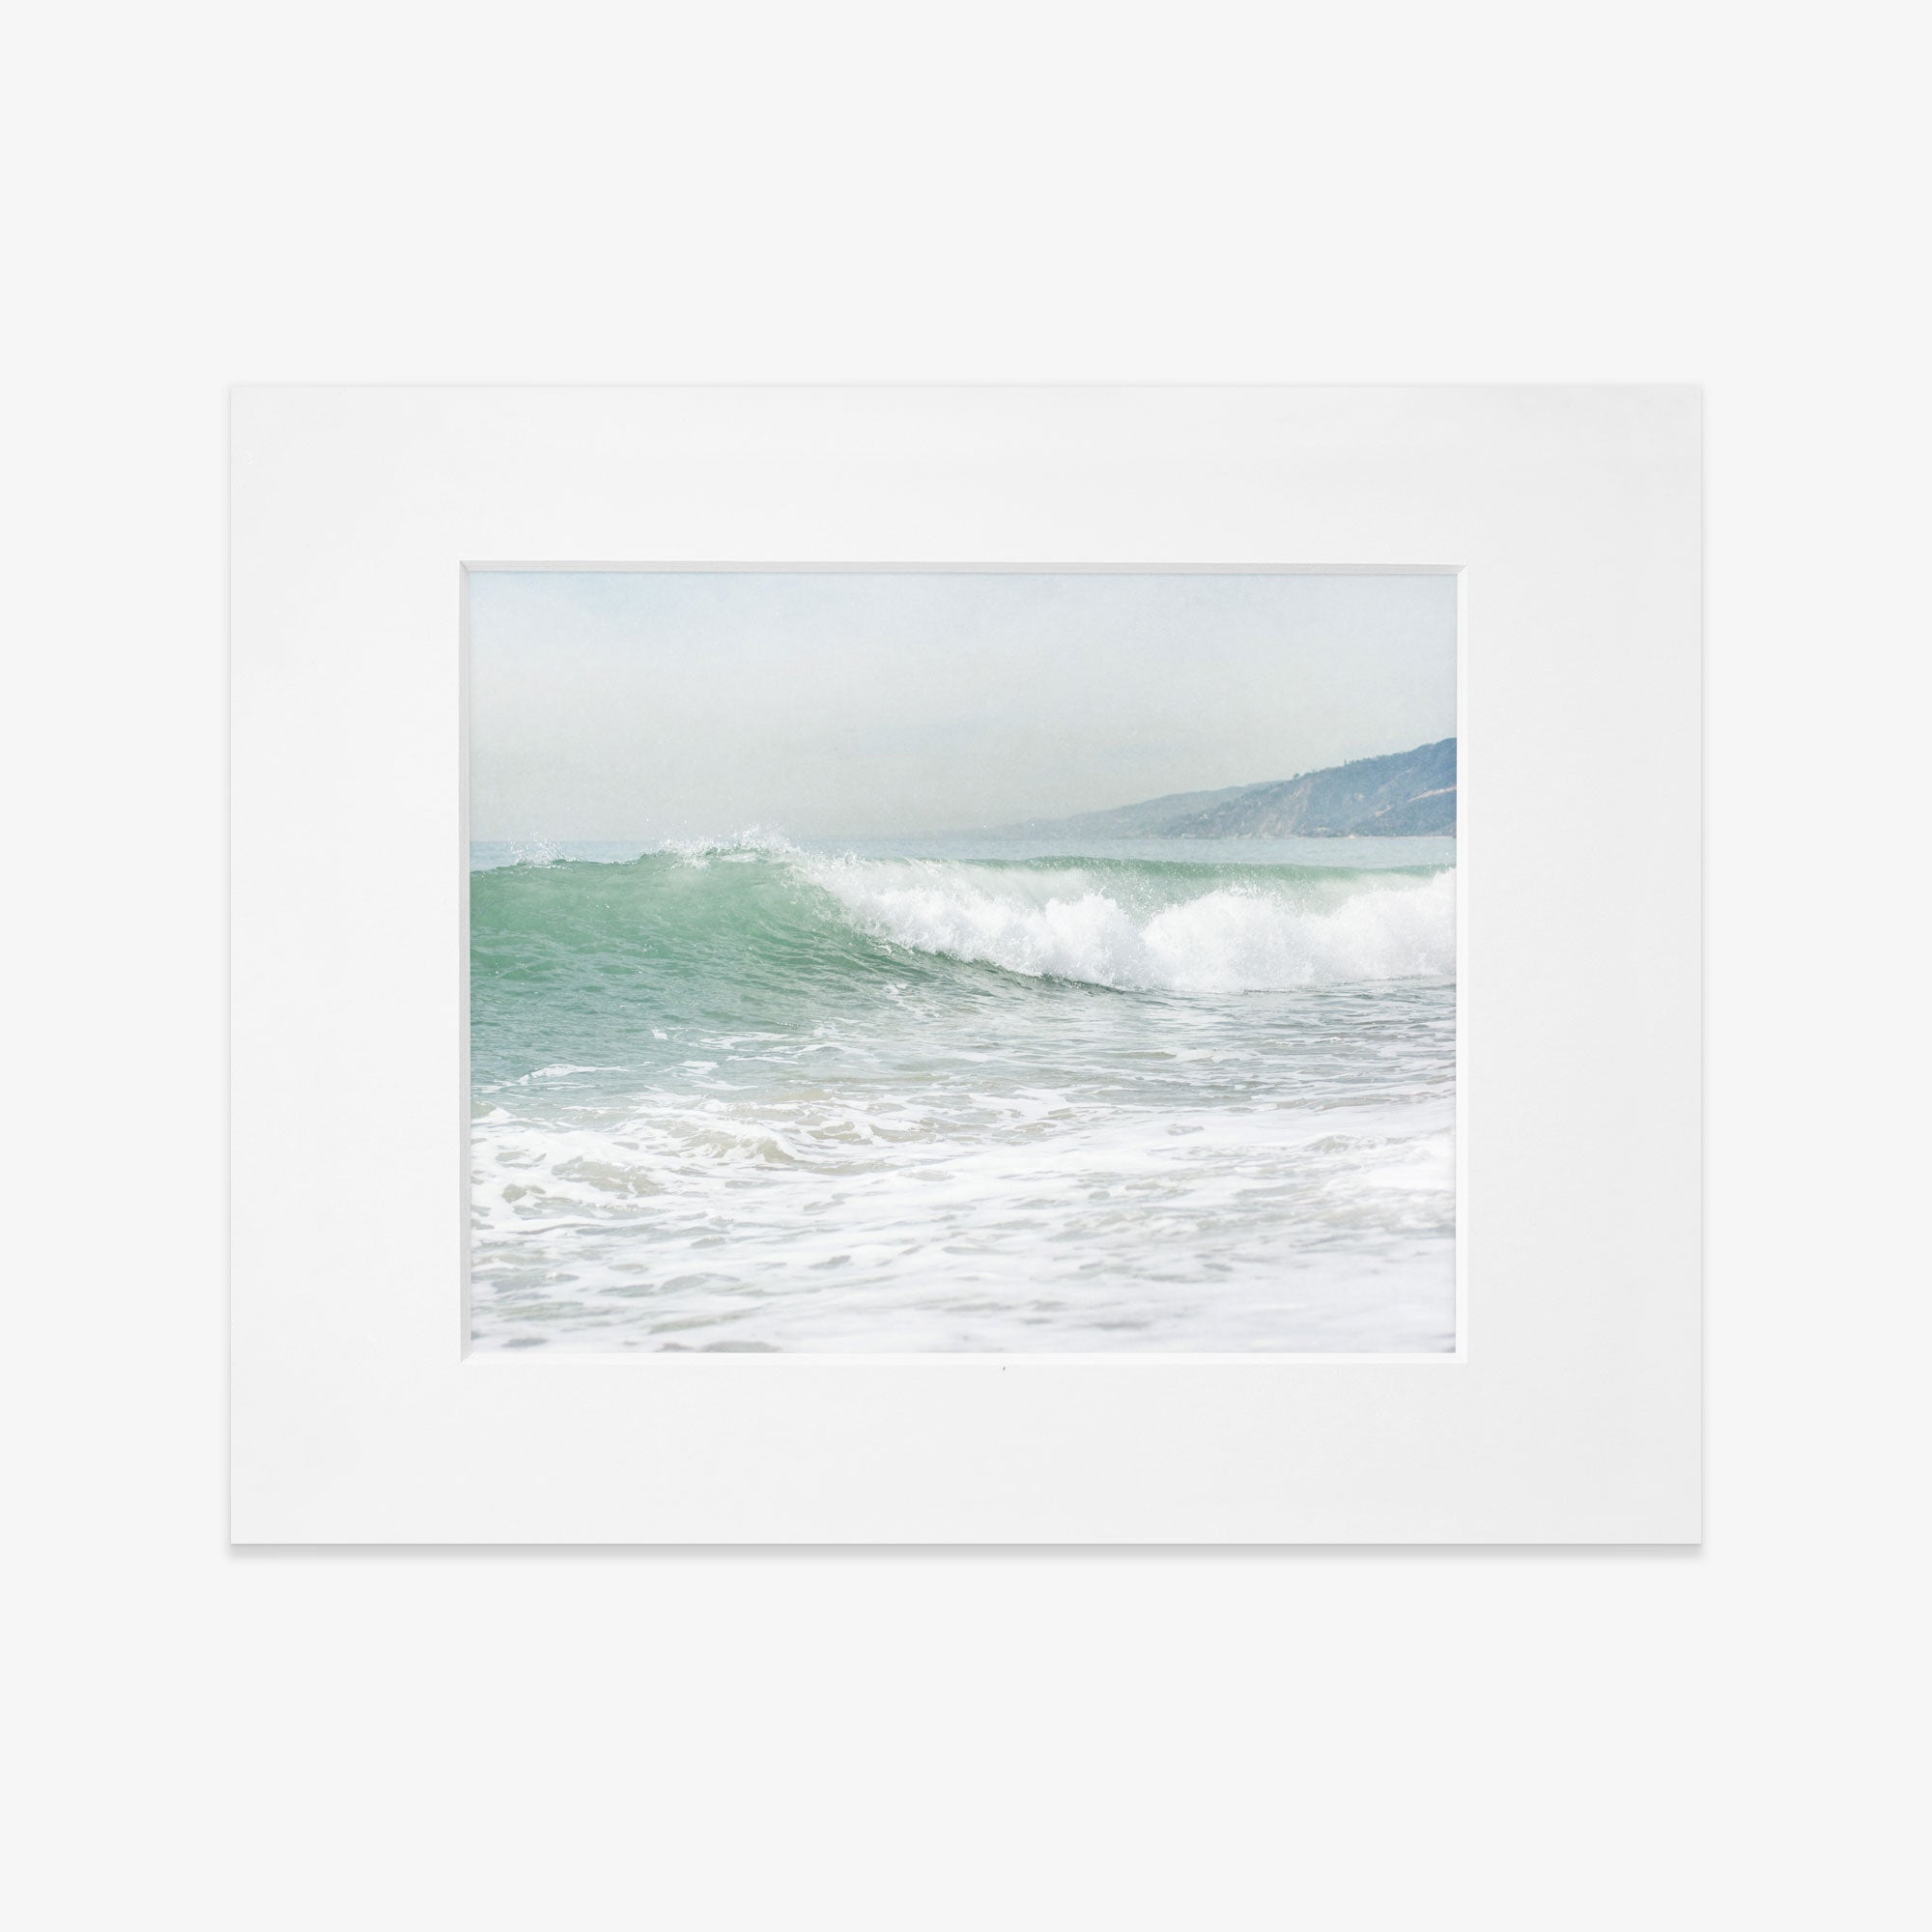 A framed photograph of a vibrant ocean wave cresting at a Southern California beach, with soft mist hovering above the water, set against a blurred coastal backdrop - Coastal Print of a Breaking Wave &#39;Breaking Surf&#39; by Offley Green.